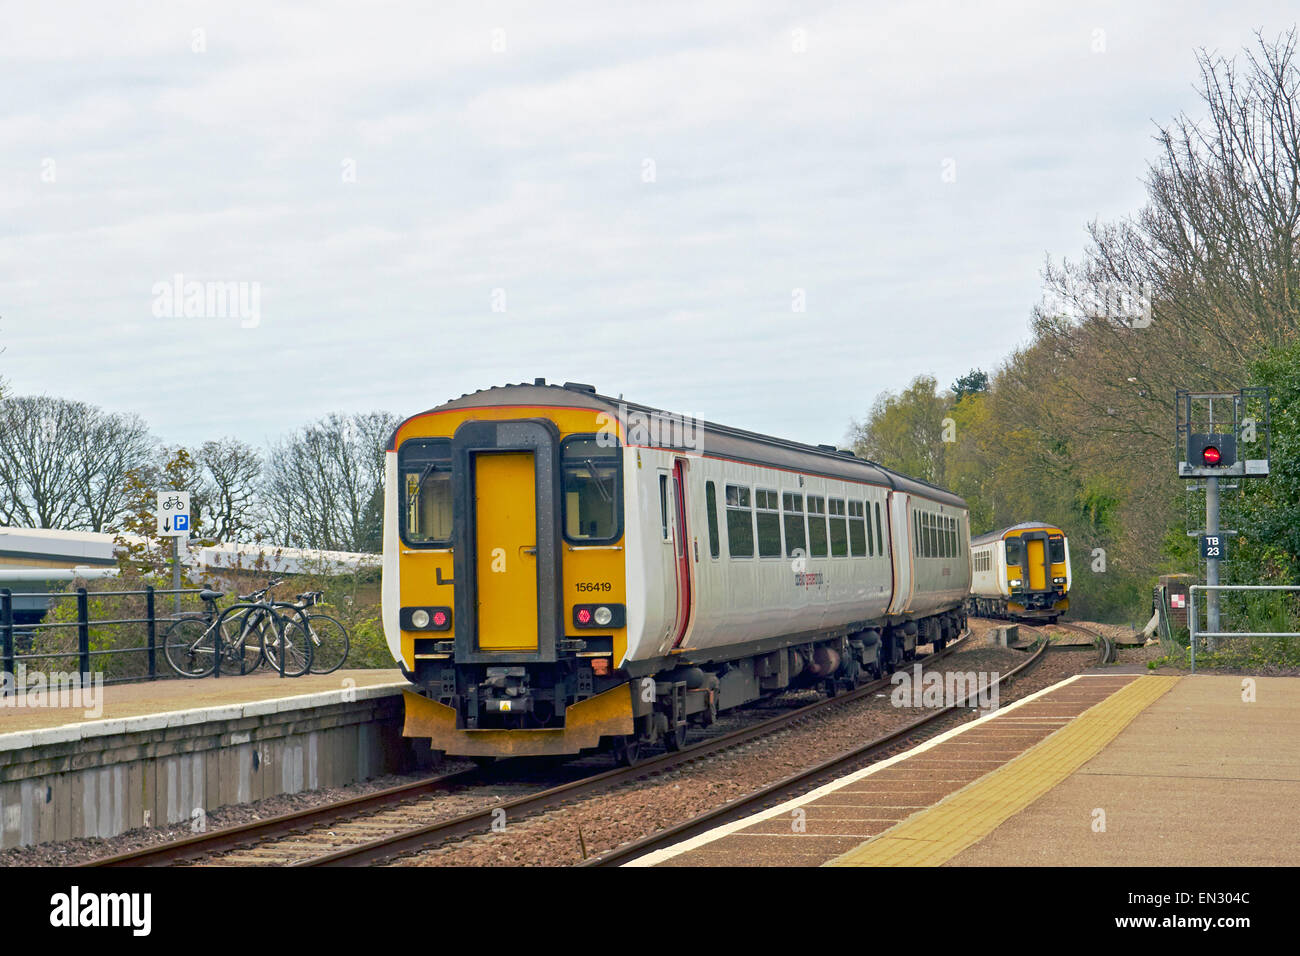 Abellio Greater Anglia Class 156 Super Sprinter diesel multiple-unit train (DMU) at North Walsham on branch line to Cromer. Stock Photo